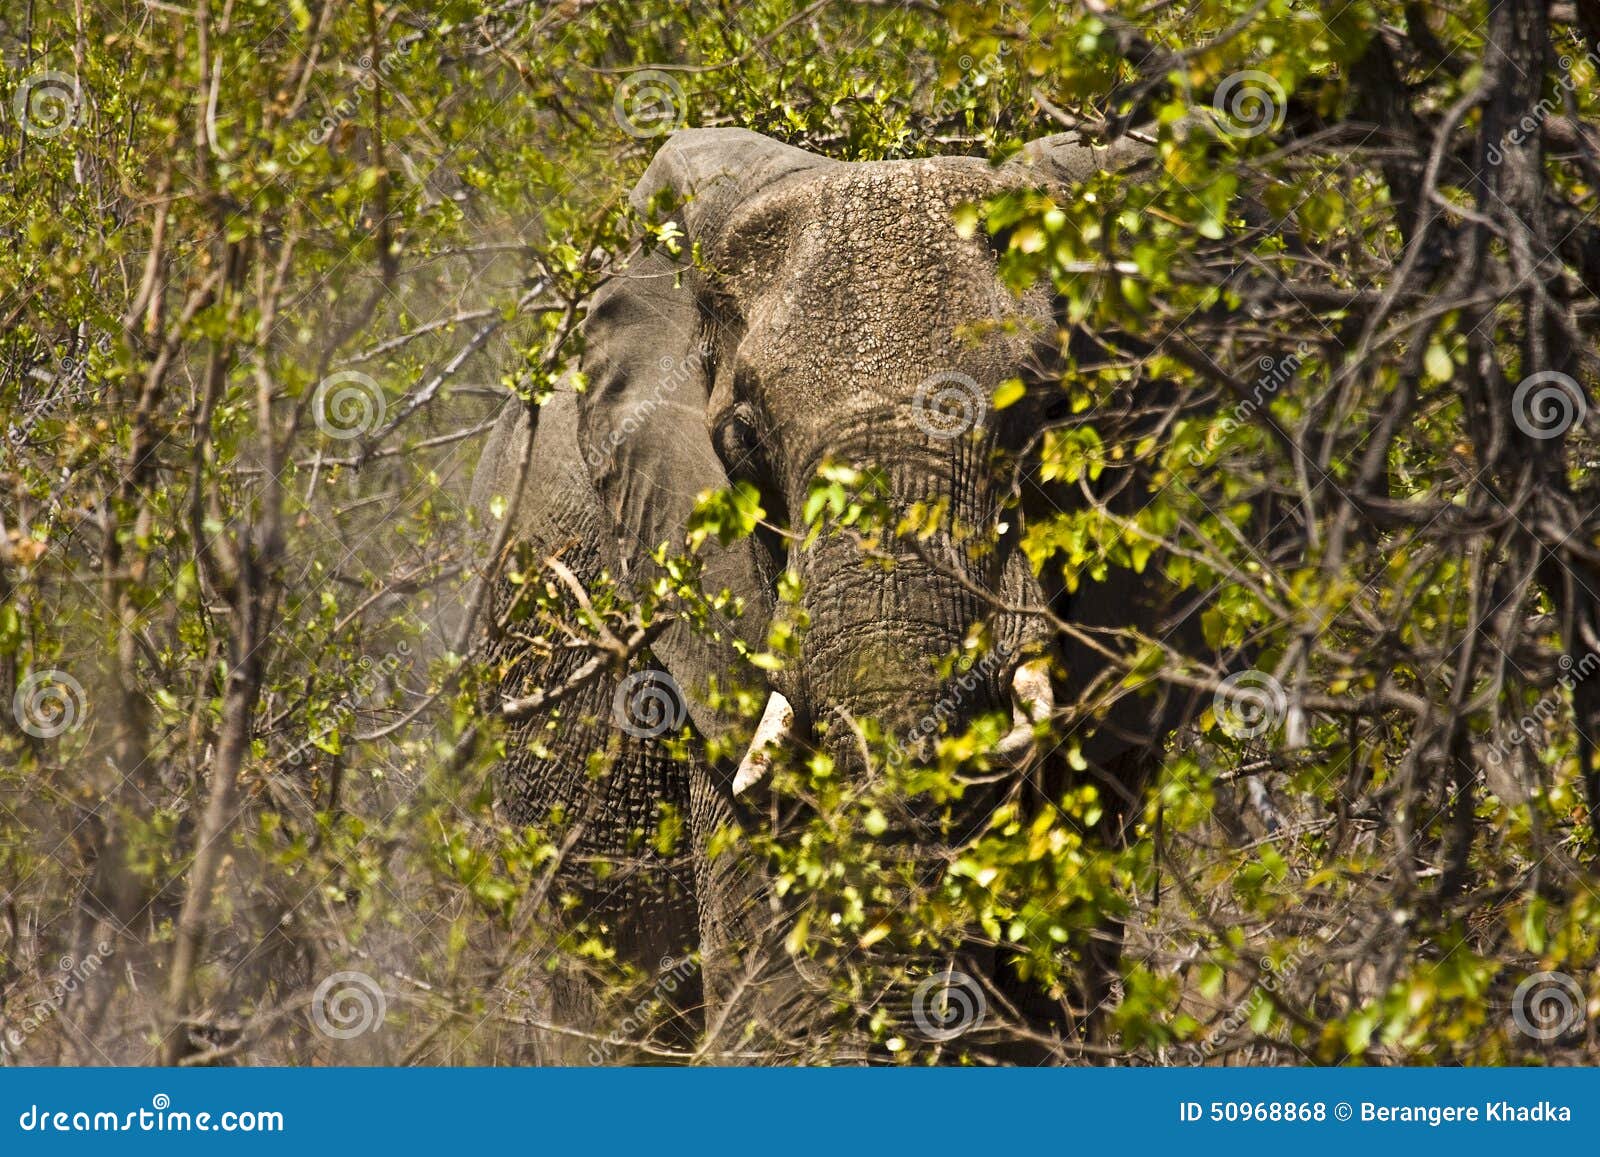 enormous african elephant in the bush , kruger national park, south africa